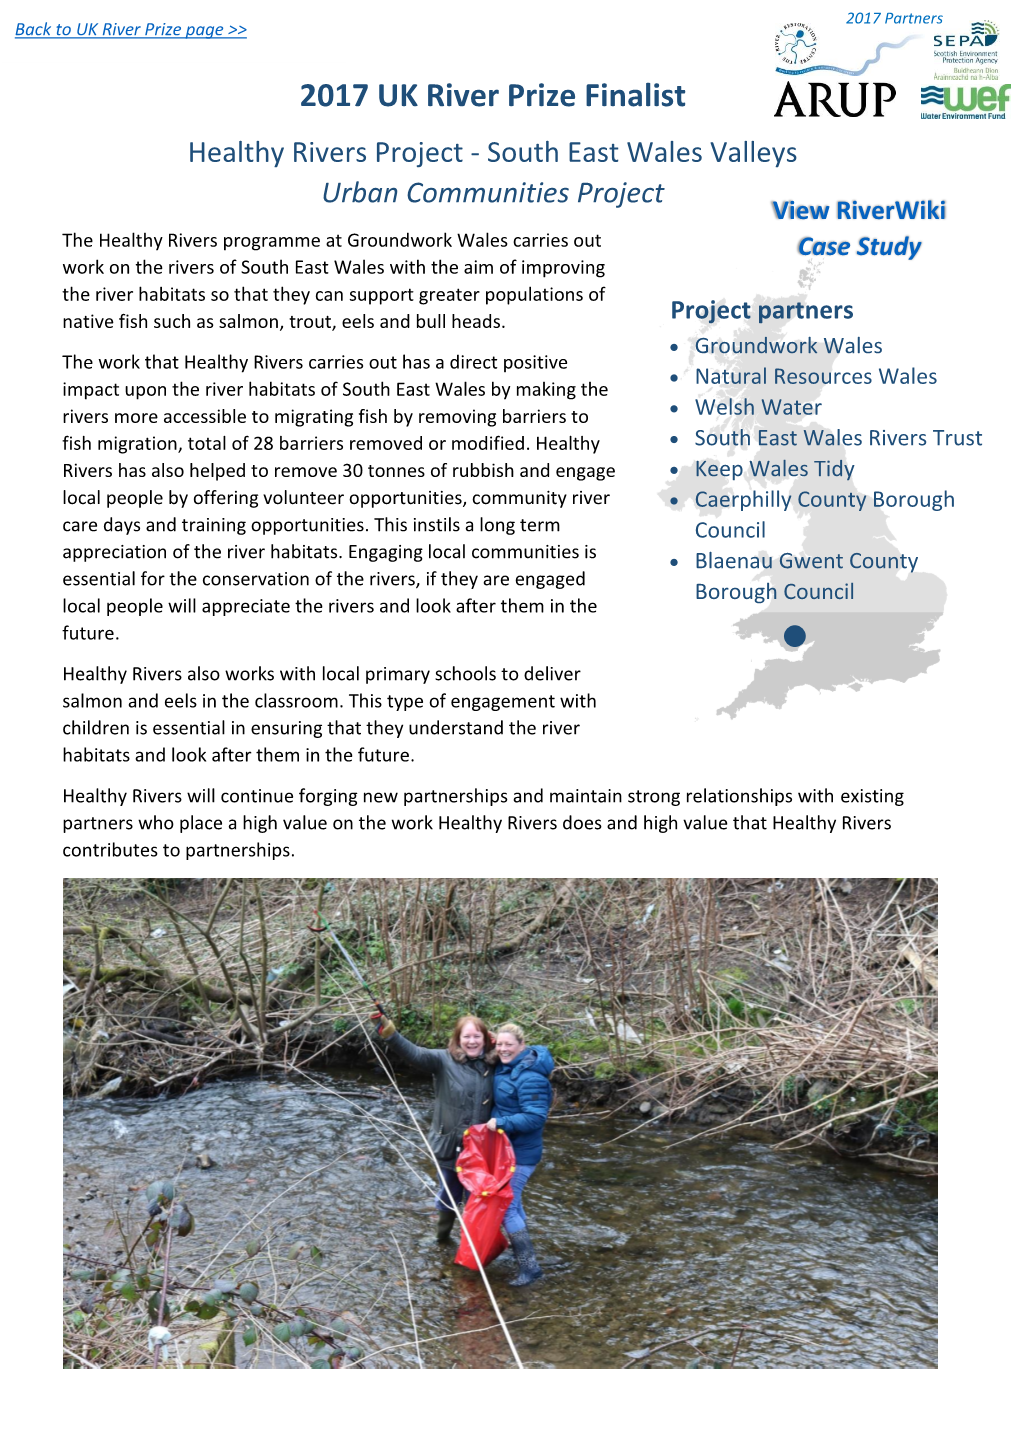 Healthy Rivers Project